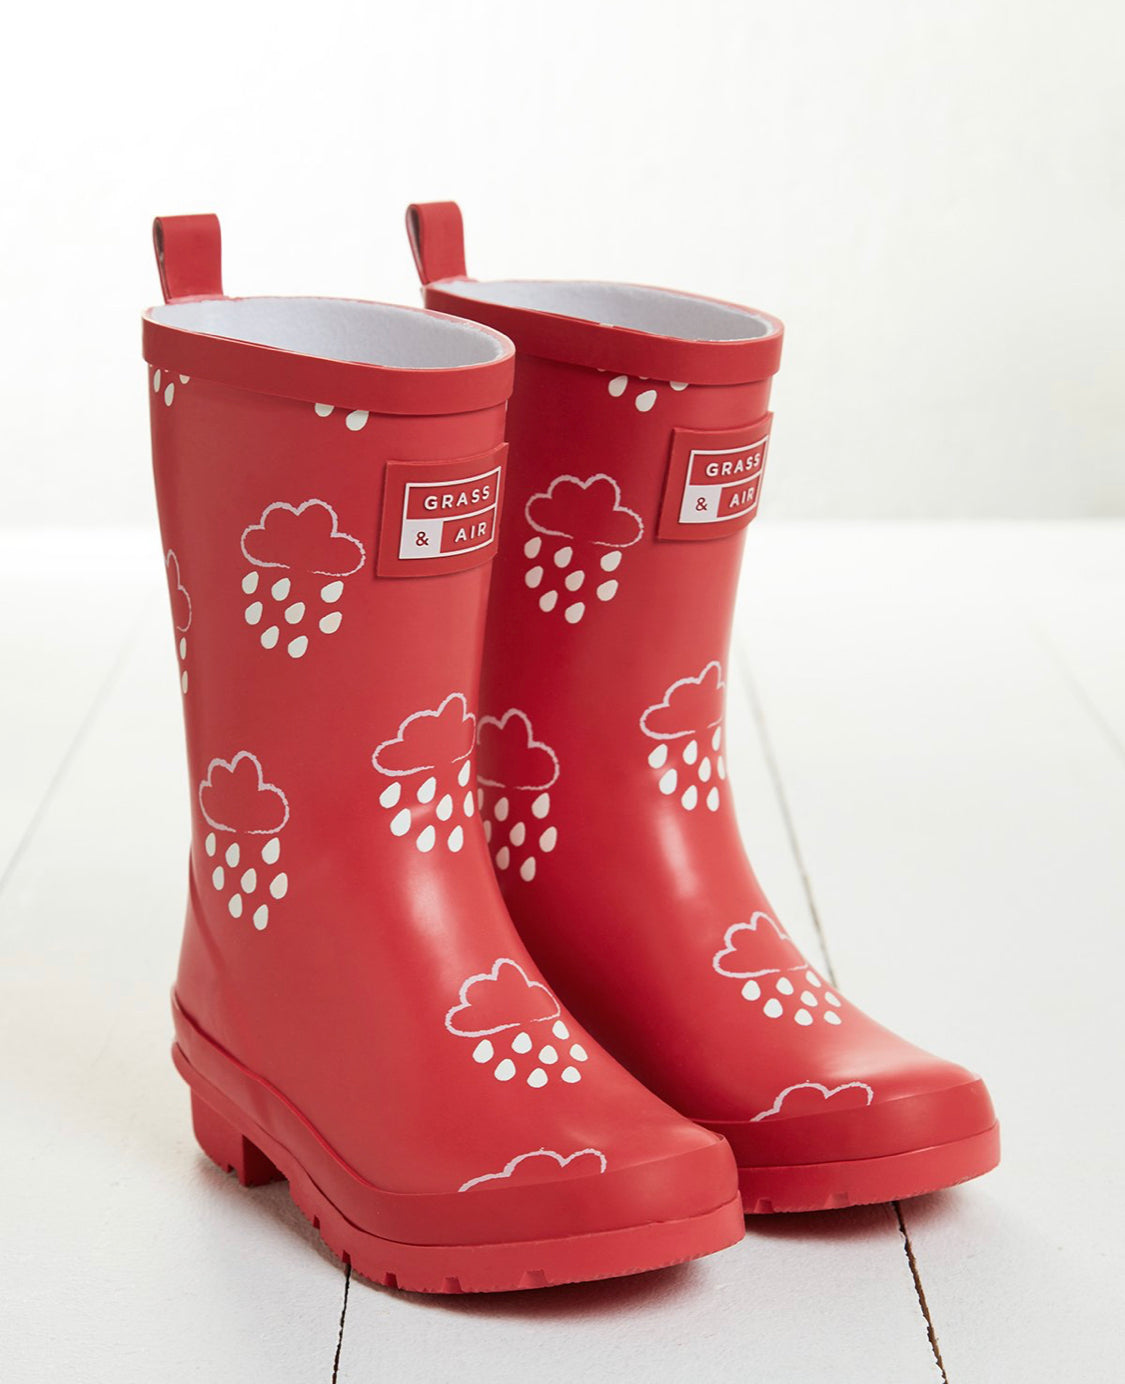 Junior Kids Colour Changing Red Wellies by Grass & Air | Cotswold Baby Co